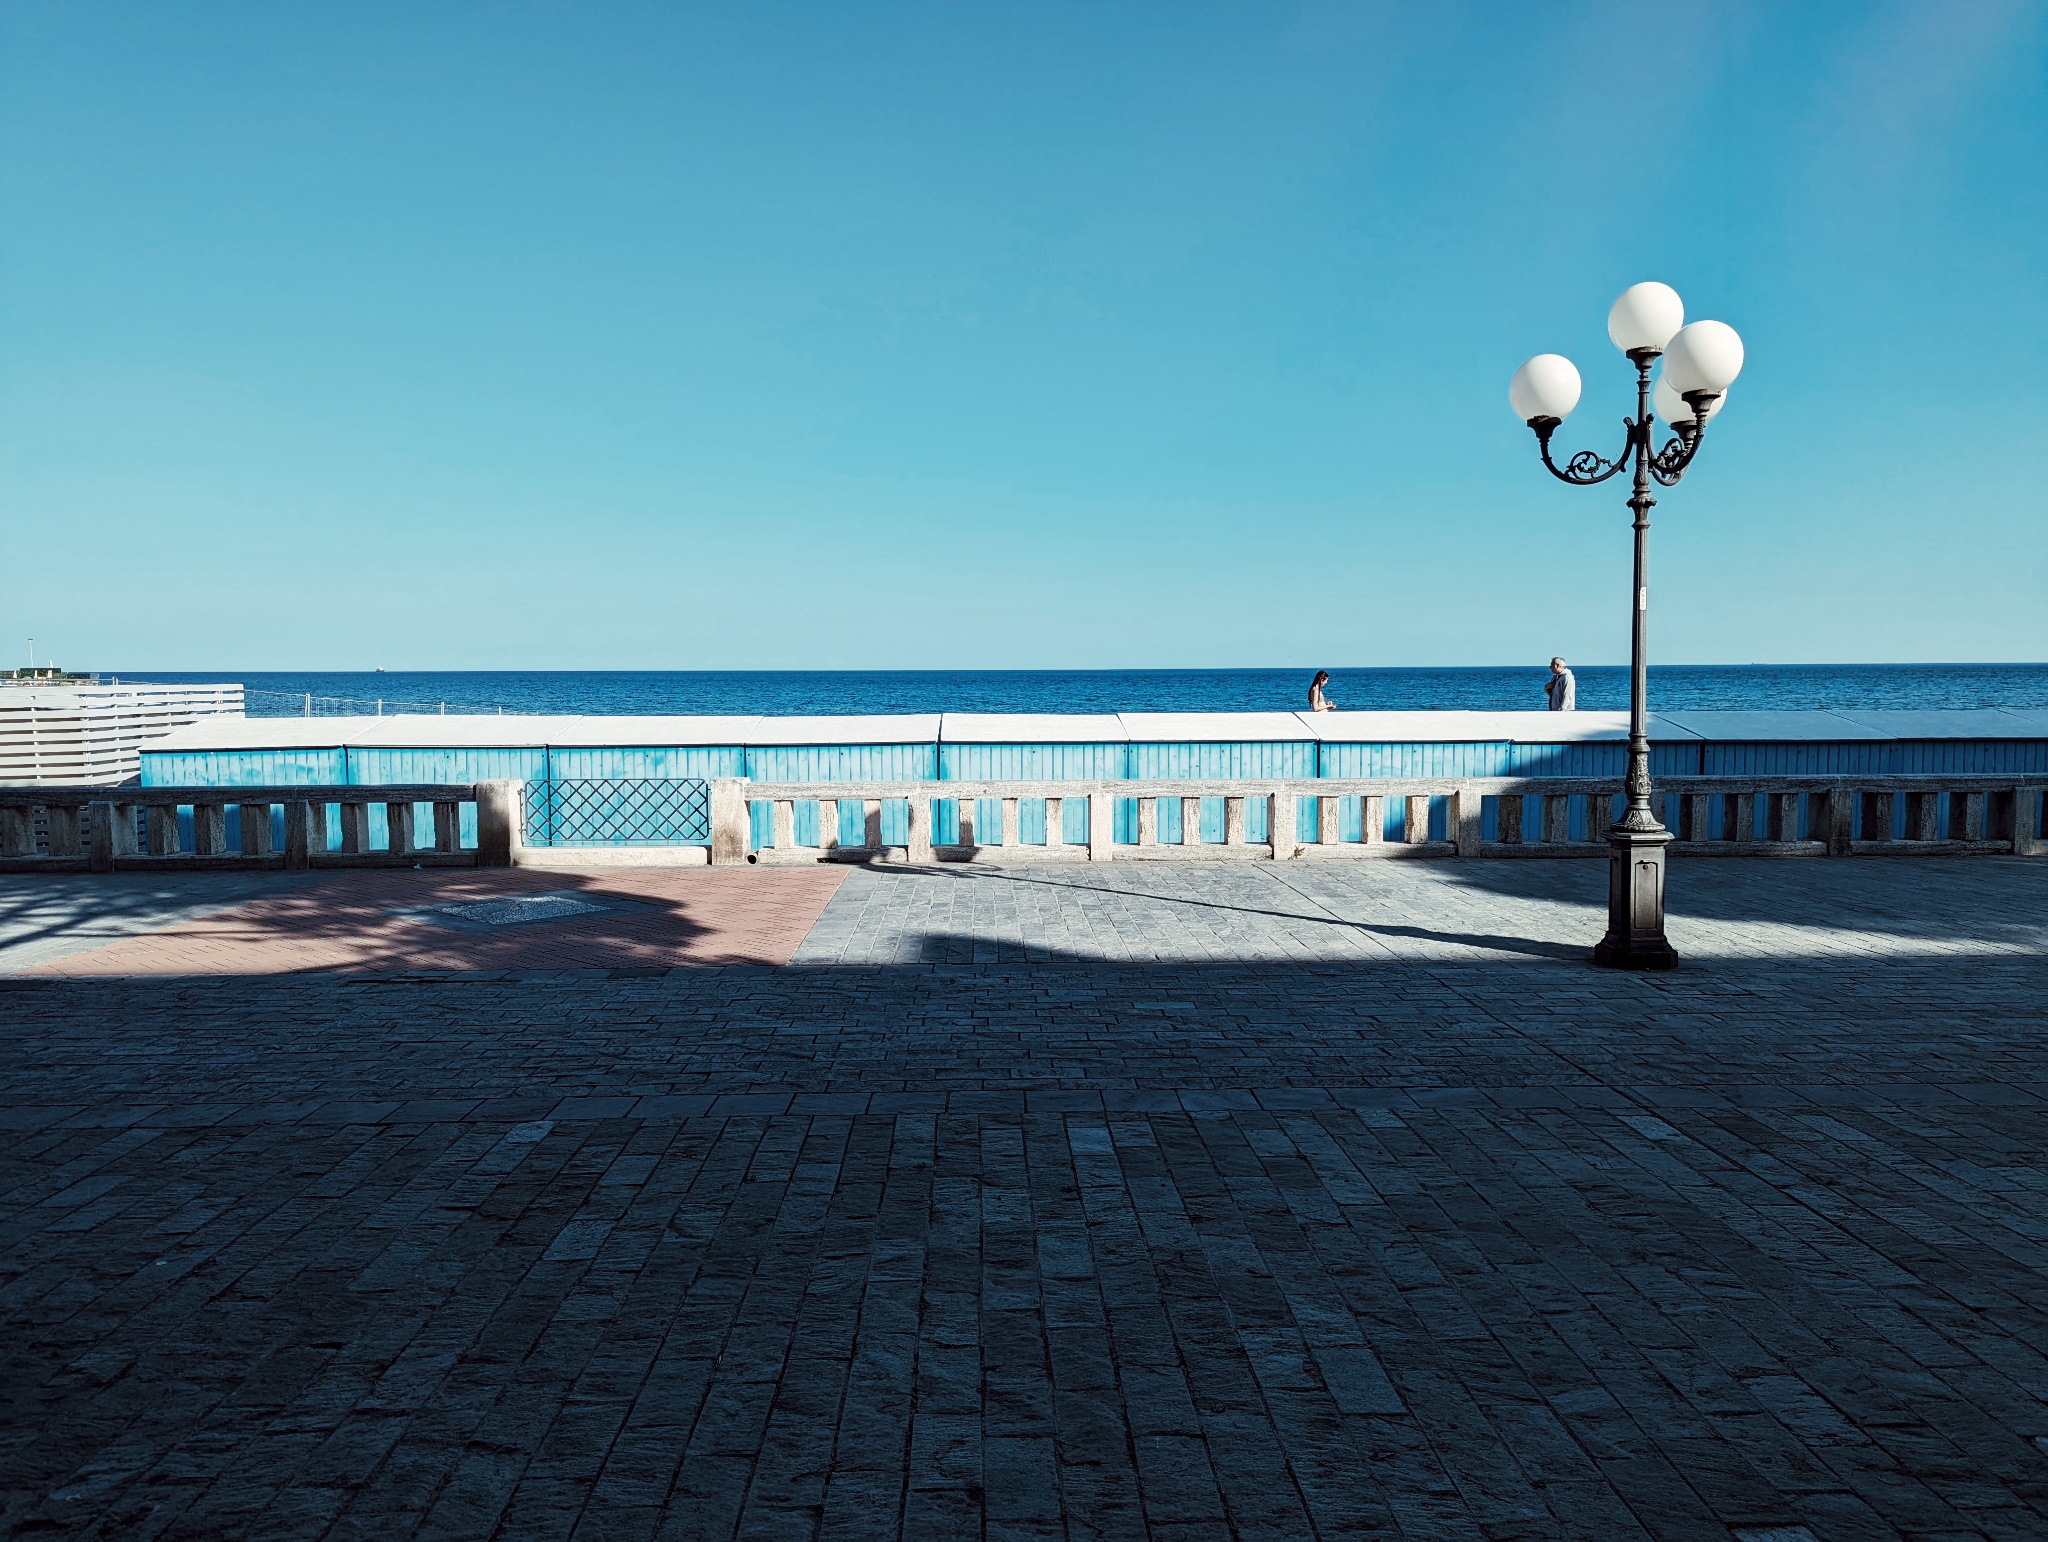 Promenade in Diano Marina with street light in right foreground and the Mediterranean Sea in the background